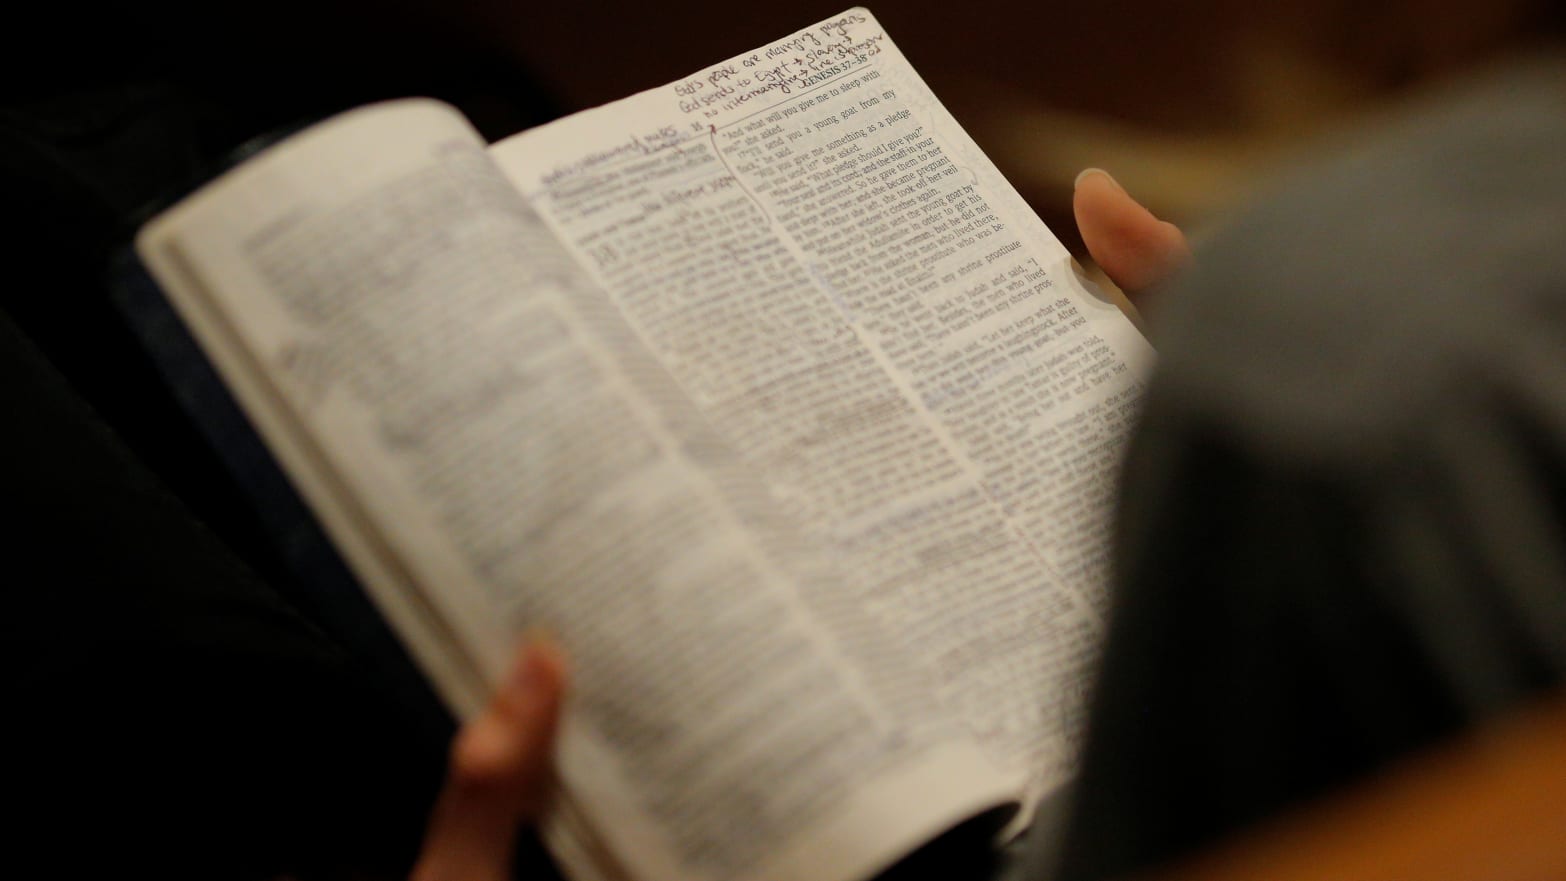 A woman reads her bible before the Exalt Showcase of gospel and Christian music at Central Presbyterian Church at the South by Southwest (SXSW) Music Film Interactive Festival 2017 in Austin, Texas, U.S., March 14, 2017.